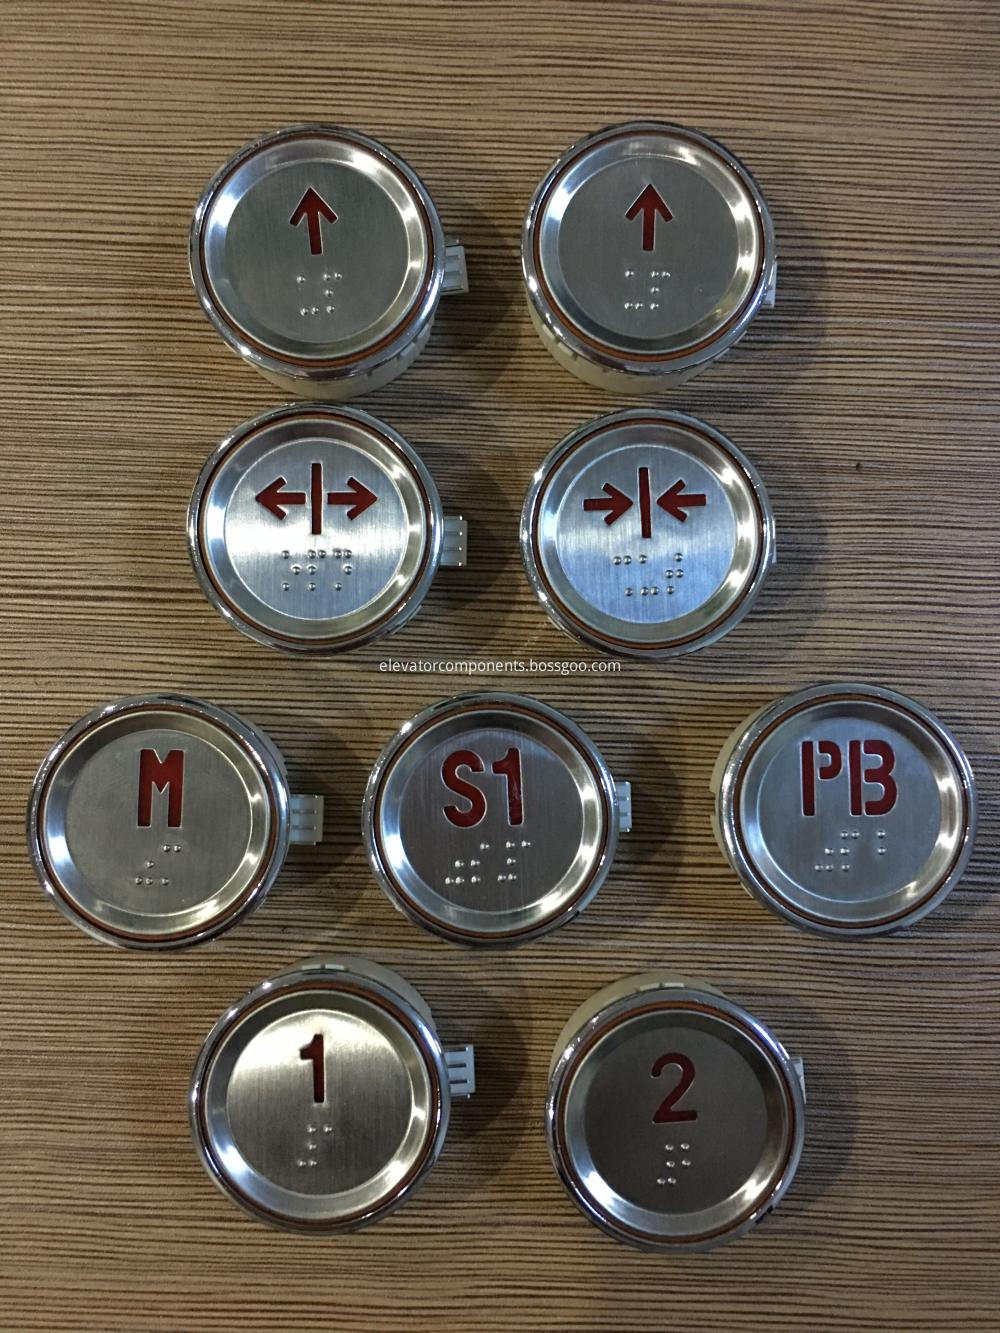 Push Buttons for LG Sigma Elevators